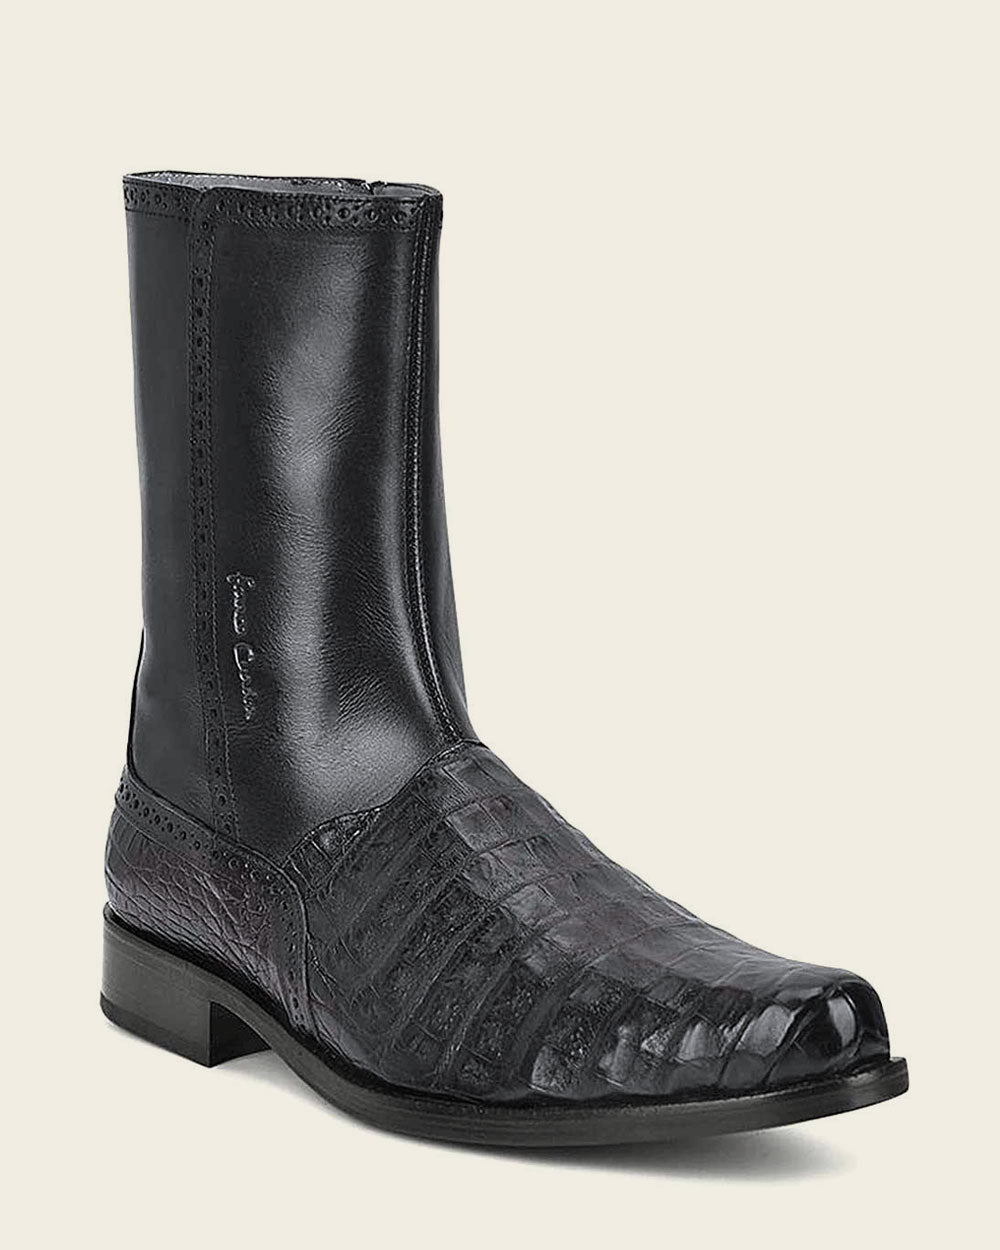 Cuadra Black Boots: Bold statement in hand-painted exotic leather.